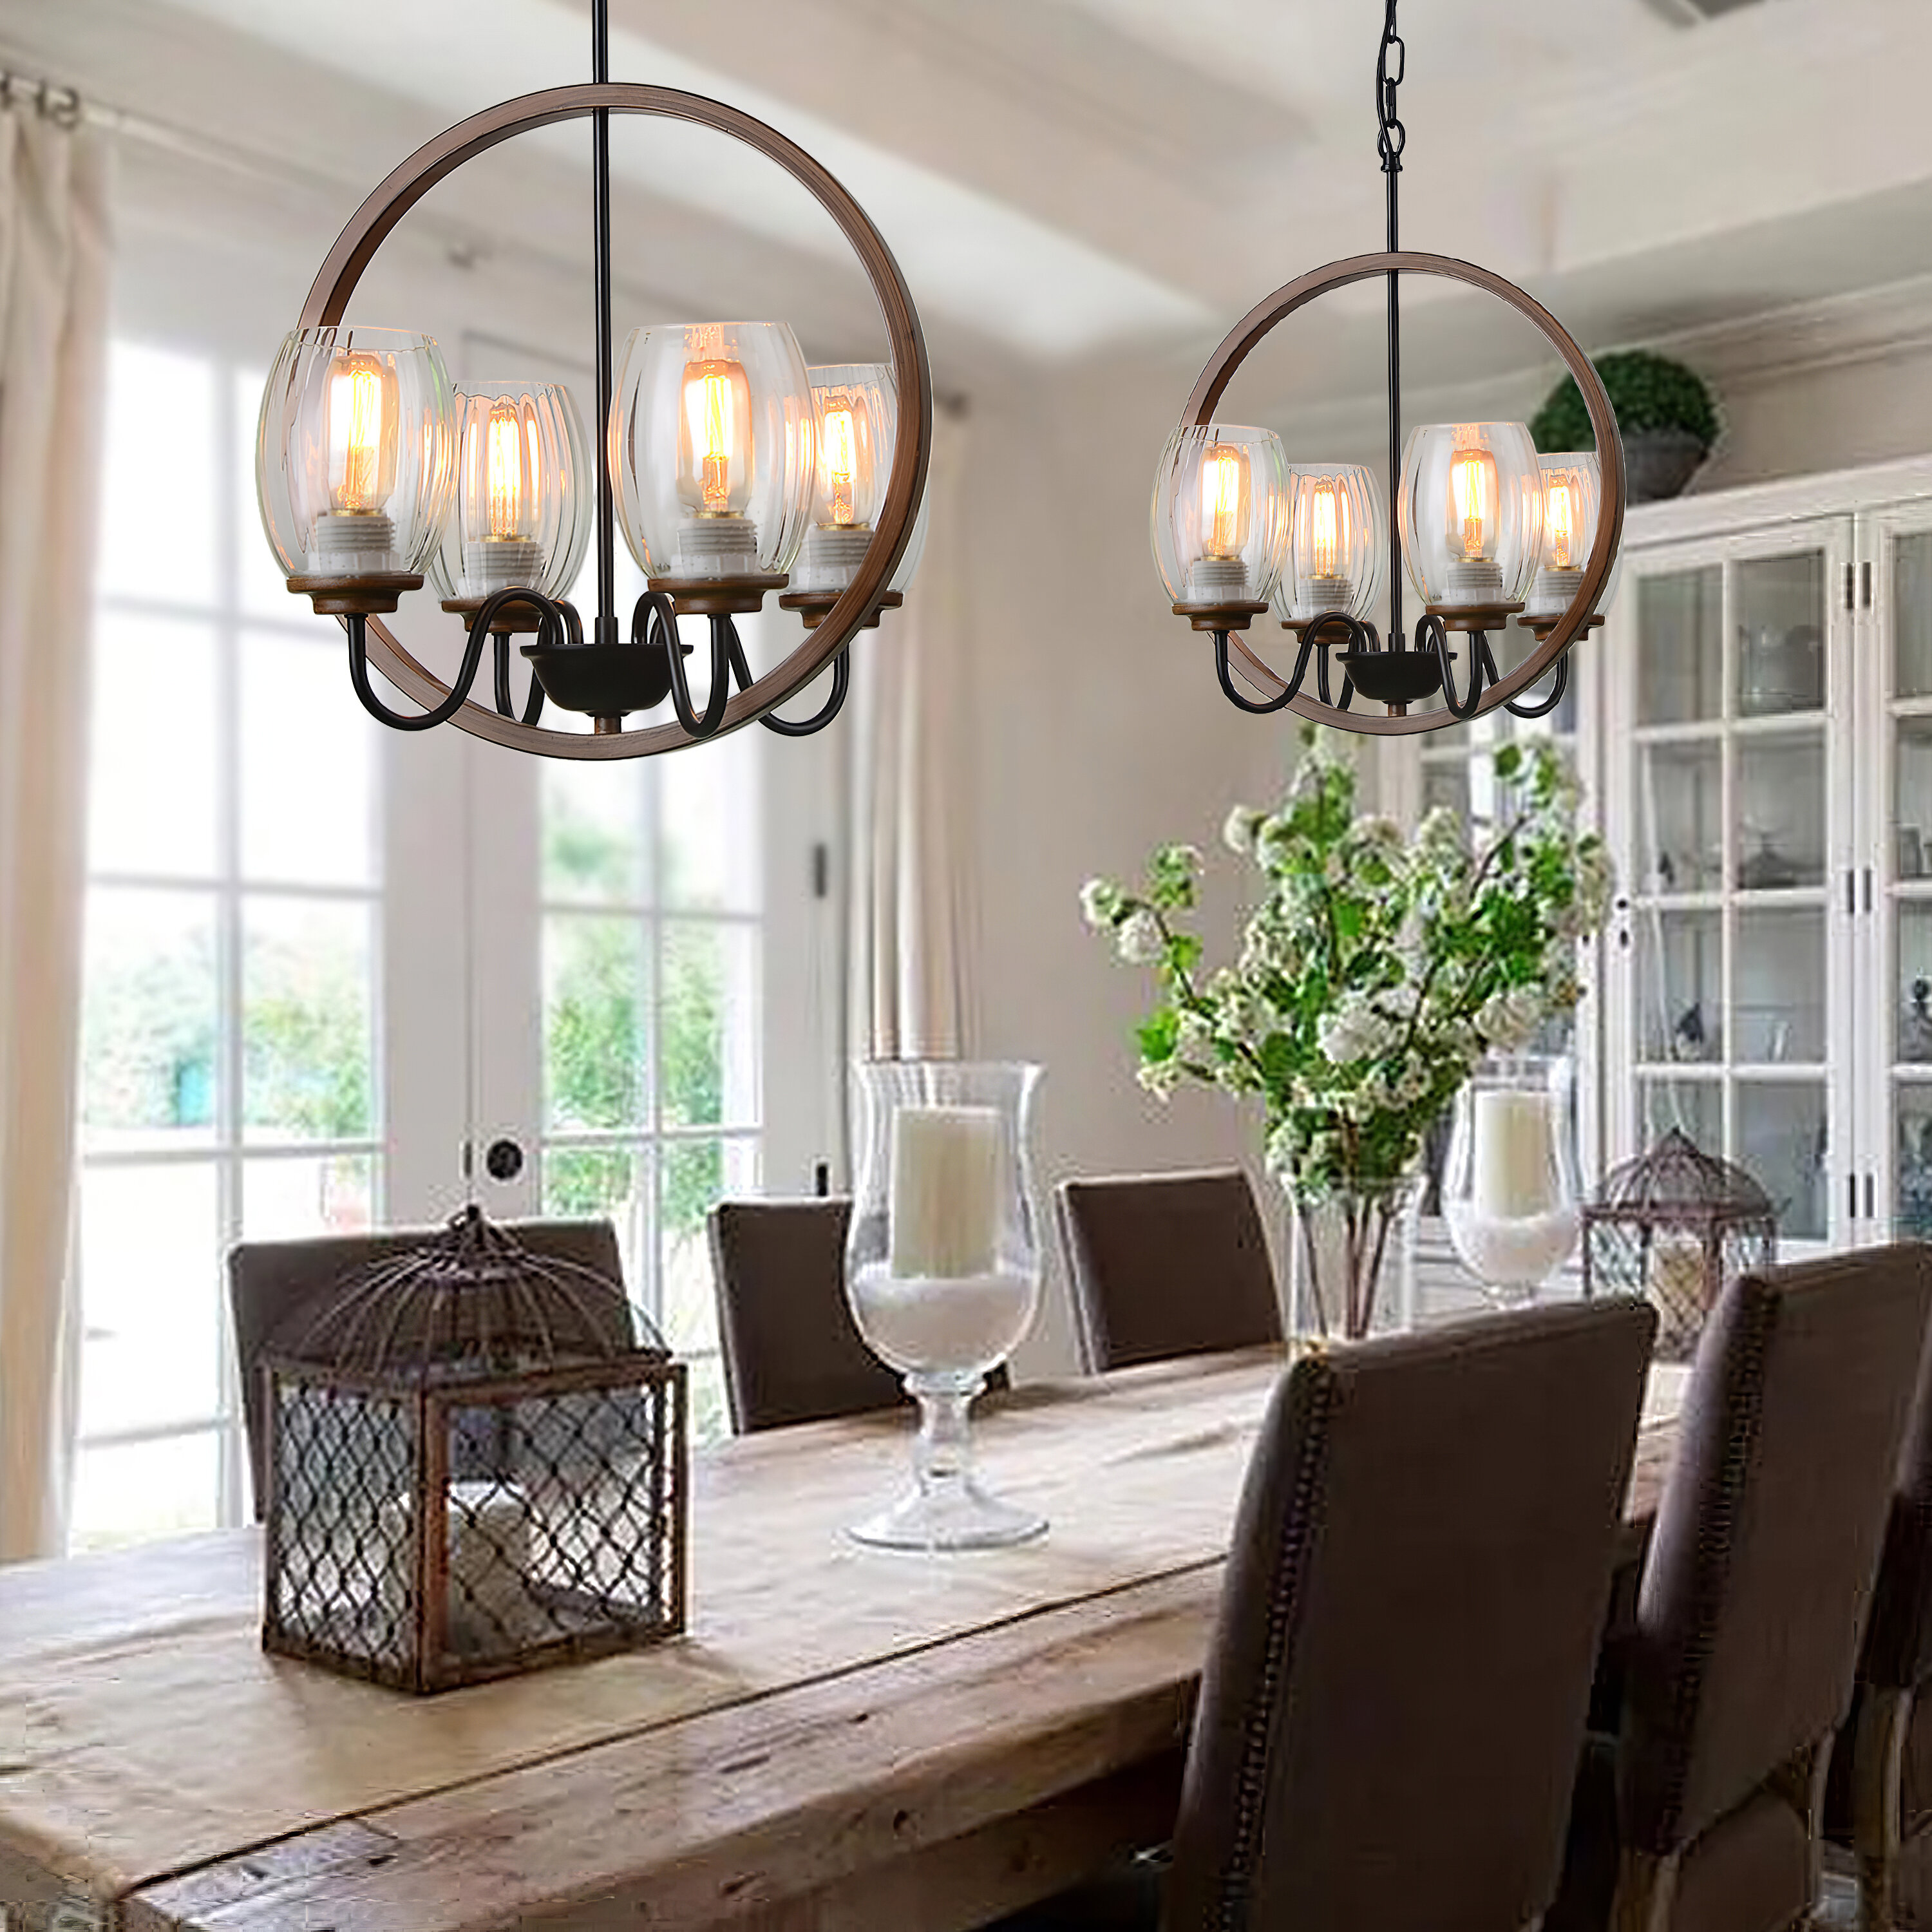 PENDANT CLEAR GLASS SHADE LIVING DINING ROOM KITCHEN ISLAND CHANDELIER 1 LIGHT